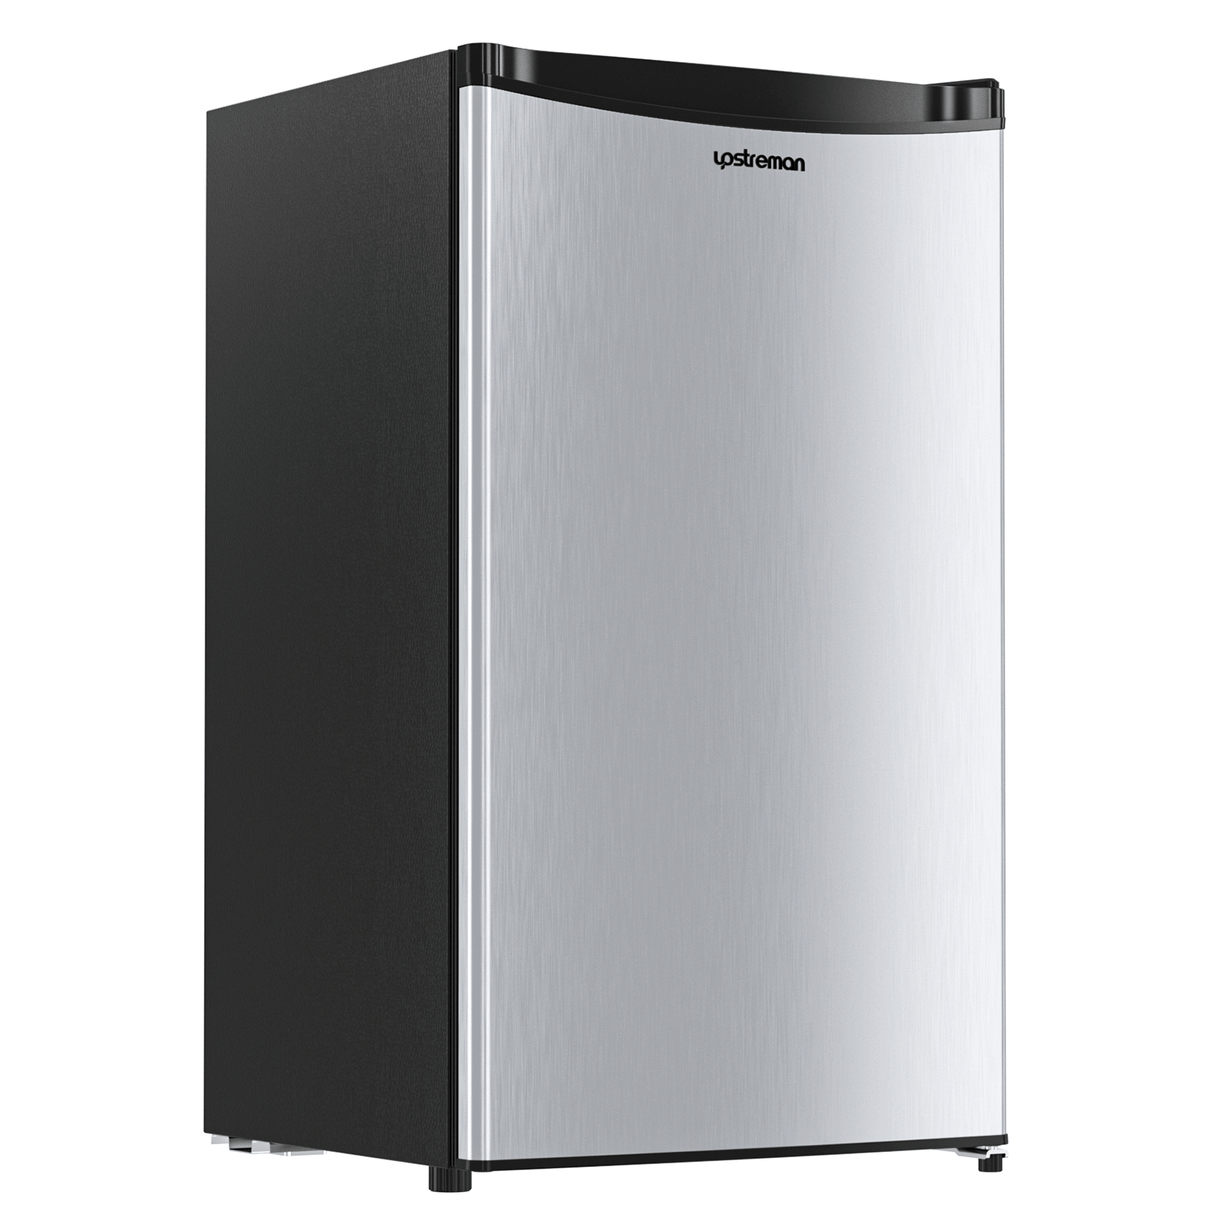 Dropship 3.2 Cu.Ft Mini Fridge With Freezer, Single Door, Adjustable  Thermostat, Refrigerator For Dorm, Office, Bedroom to Sell Online at a  Lower Price